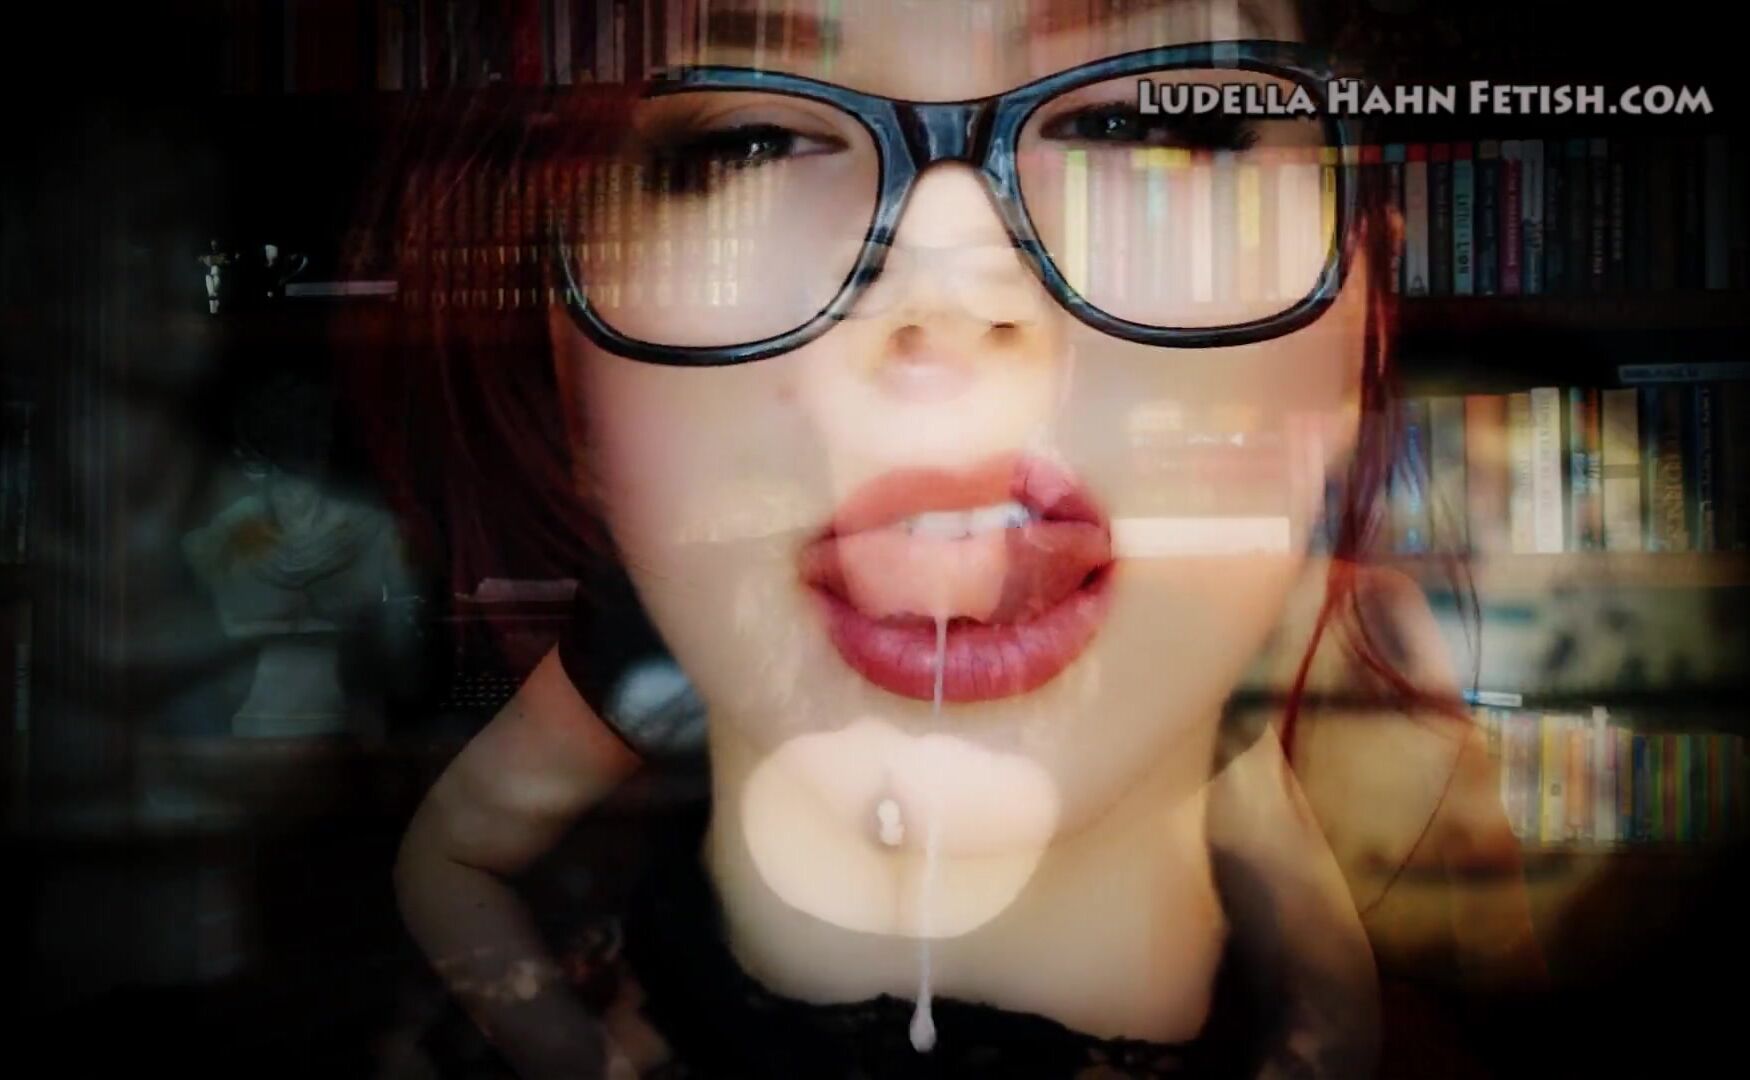 Ludella Hahn - Vore-otic Suggestion - Takes You on a Guided Vore Fantasy that might be REAL